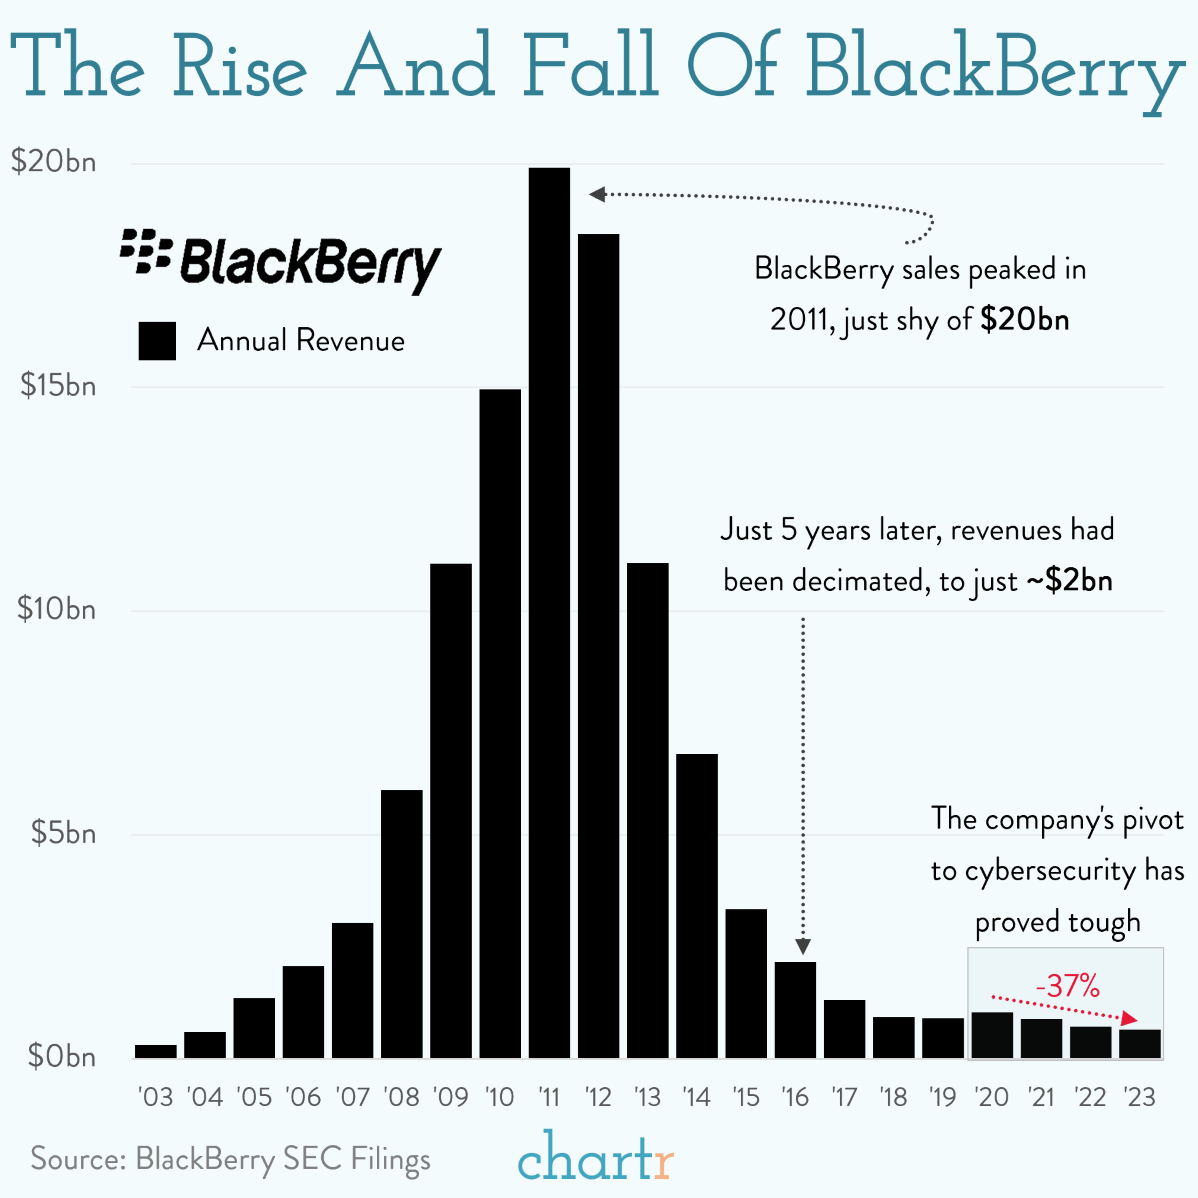 Forget the iPhone: BlackBerry is still the one to beat - The Big Picture